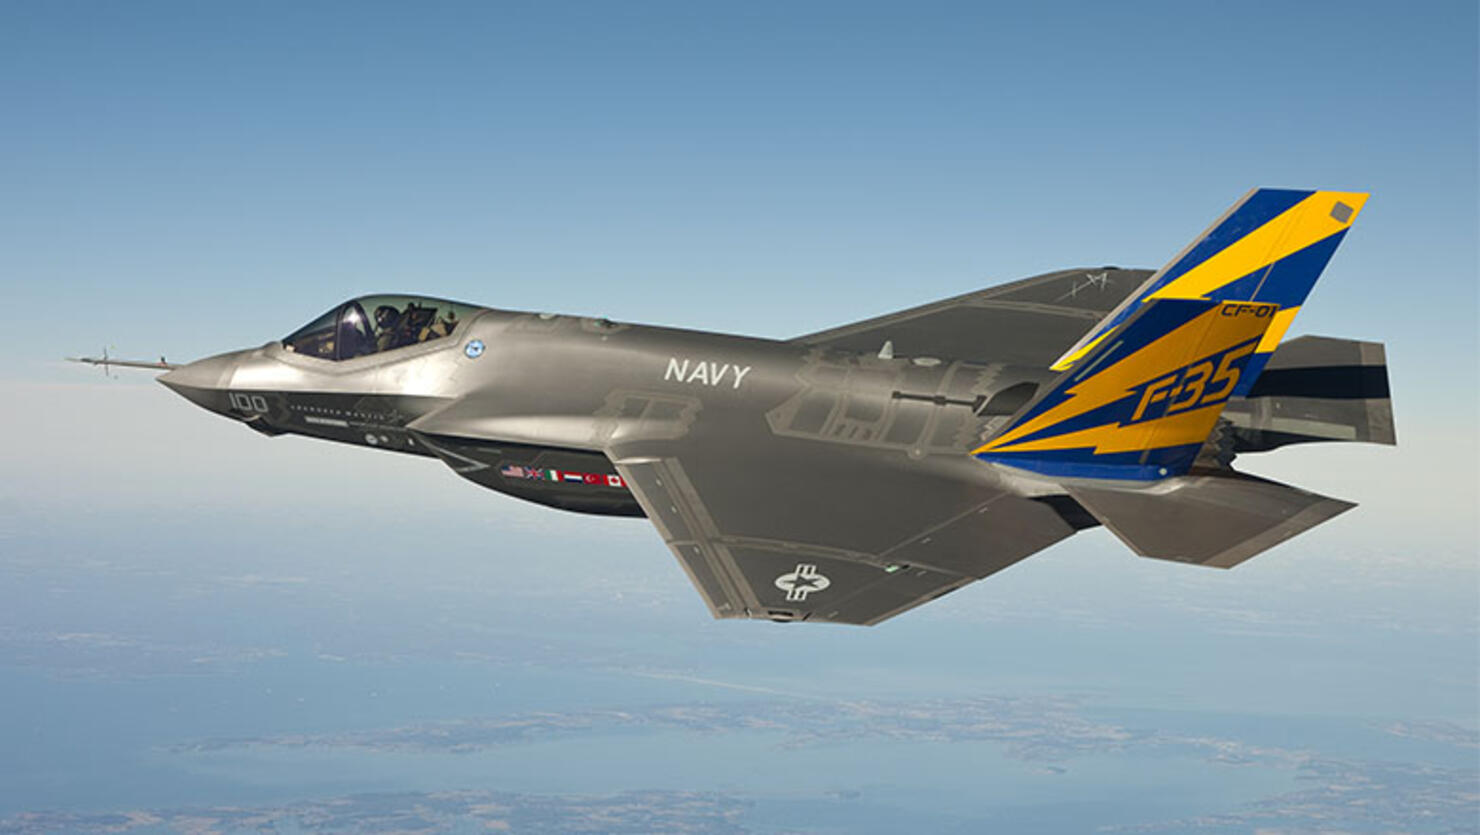 In this image released by the U.S. Navy courtesy of Lockheed Martin, the U.S. Navy variant of the F-35 Joint Strike Fighter, the F-35C, conducts a test flight